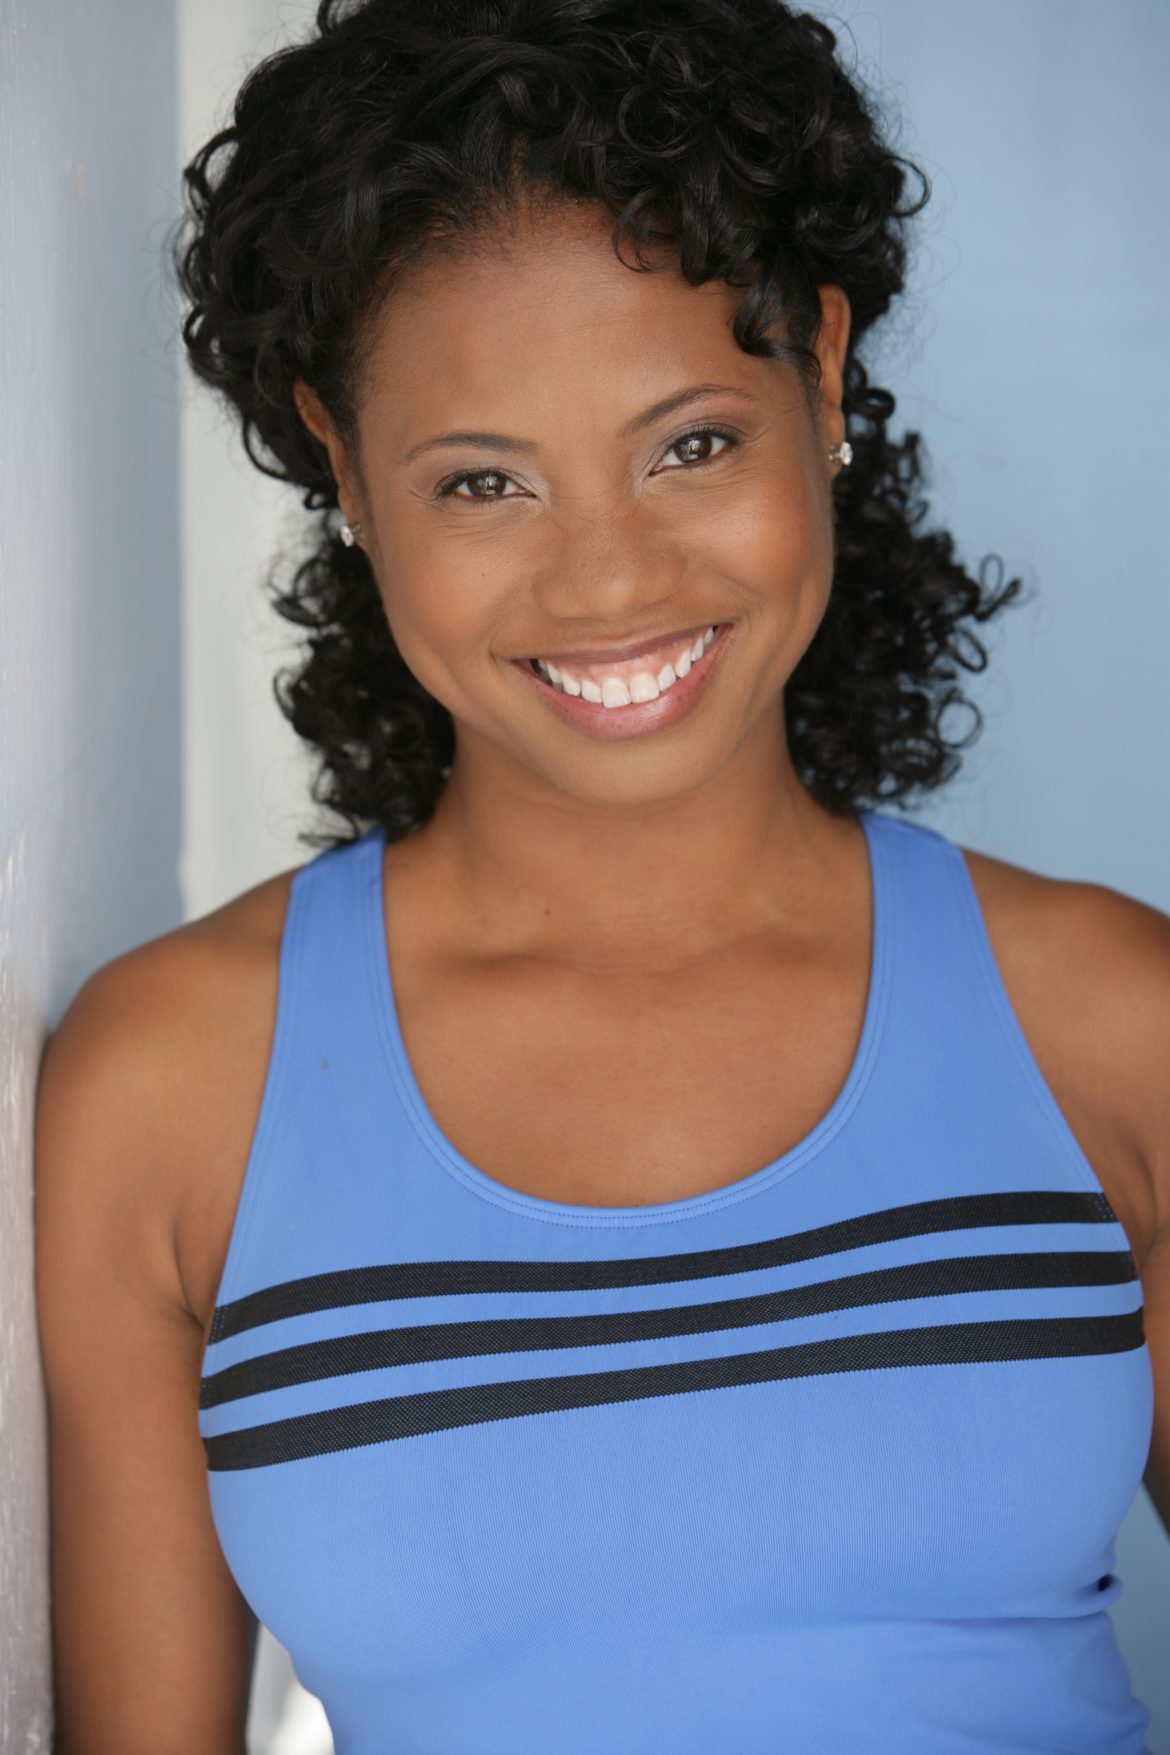 Kathryn Taylor Smith | SAG - AFTRA | Actress, Model, TV Host, Voice-Over Artist and Producer